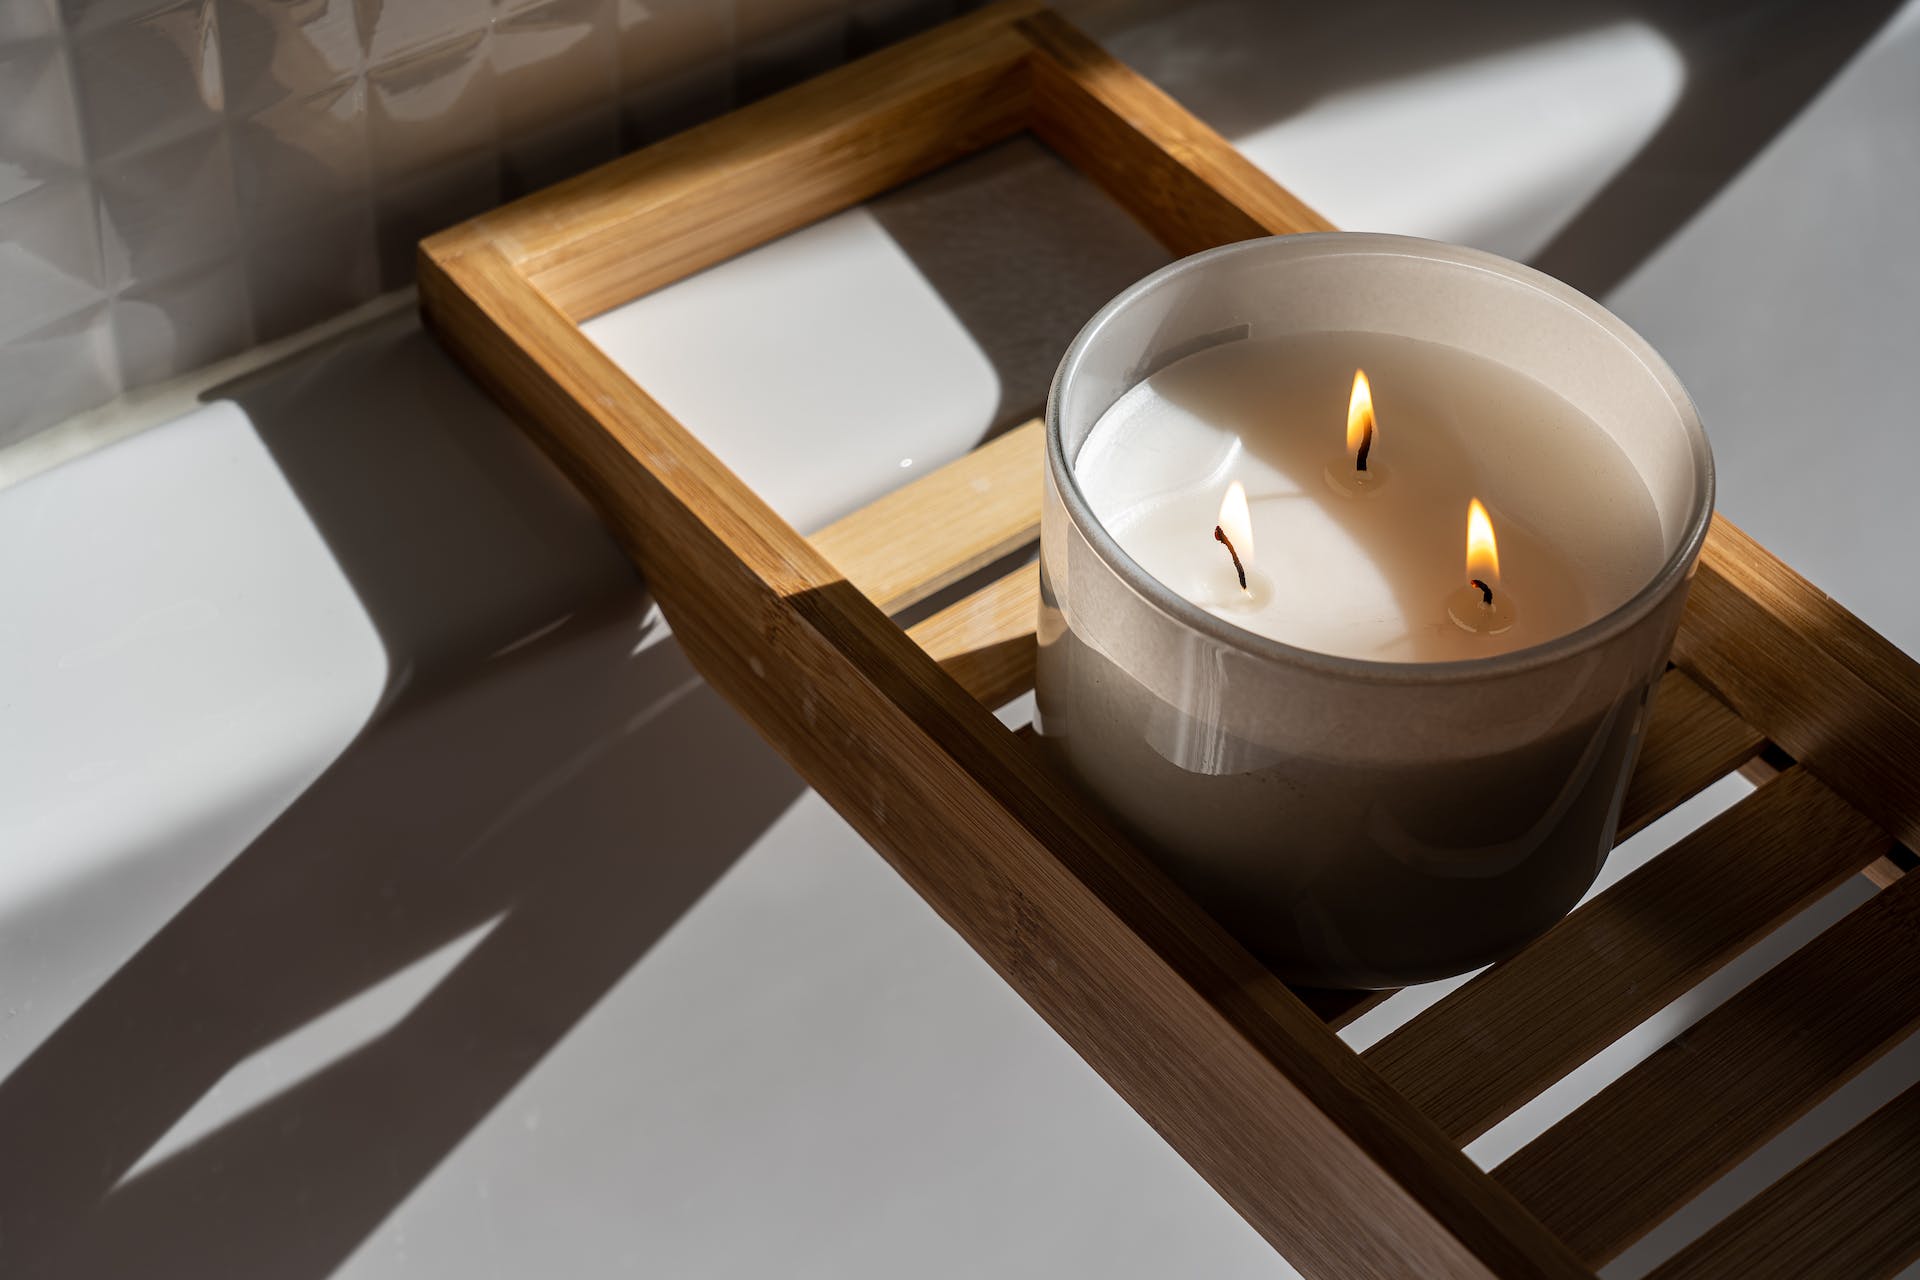 A candle on a wooden tray in the bathroom